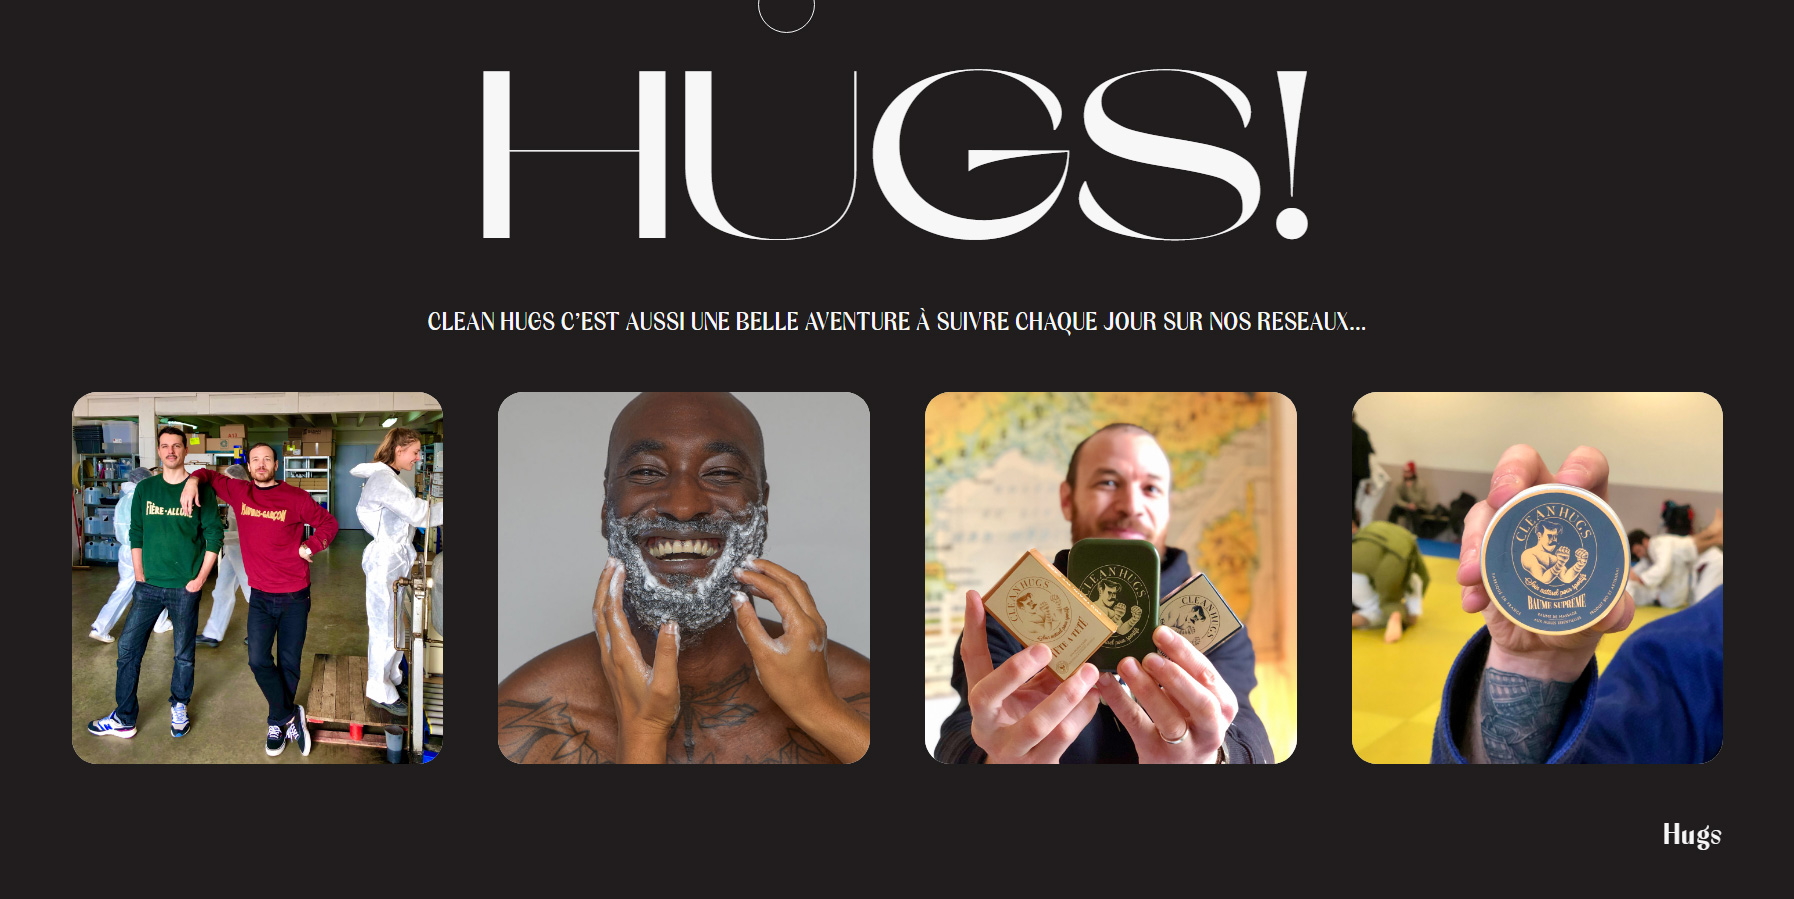 Clean Hugs - Website of the Day